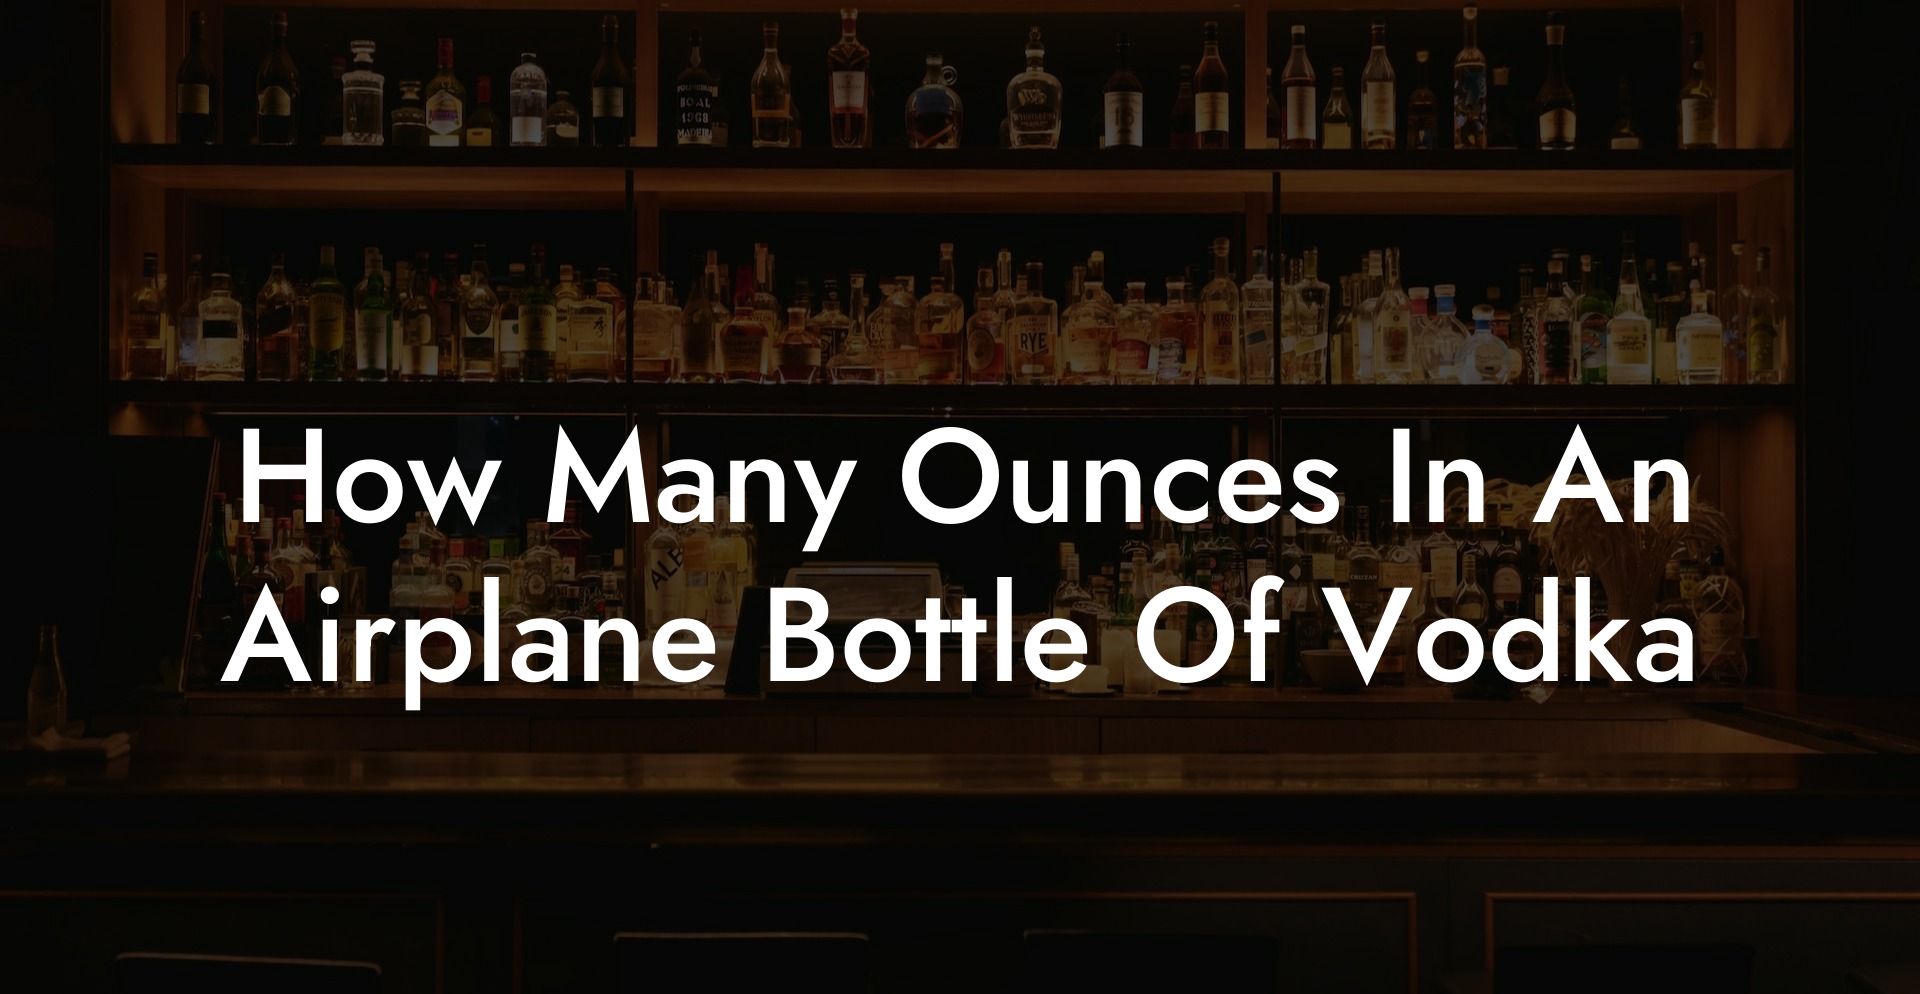 How Many Ounces In An Airplane Bottle Of Vodka